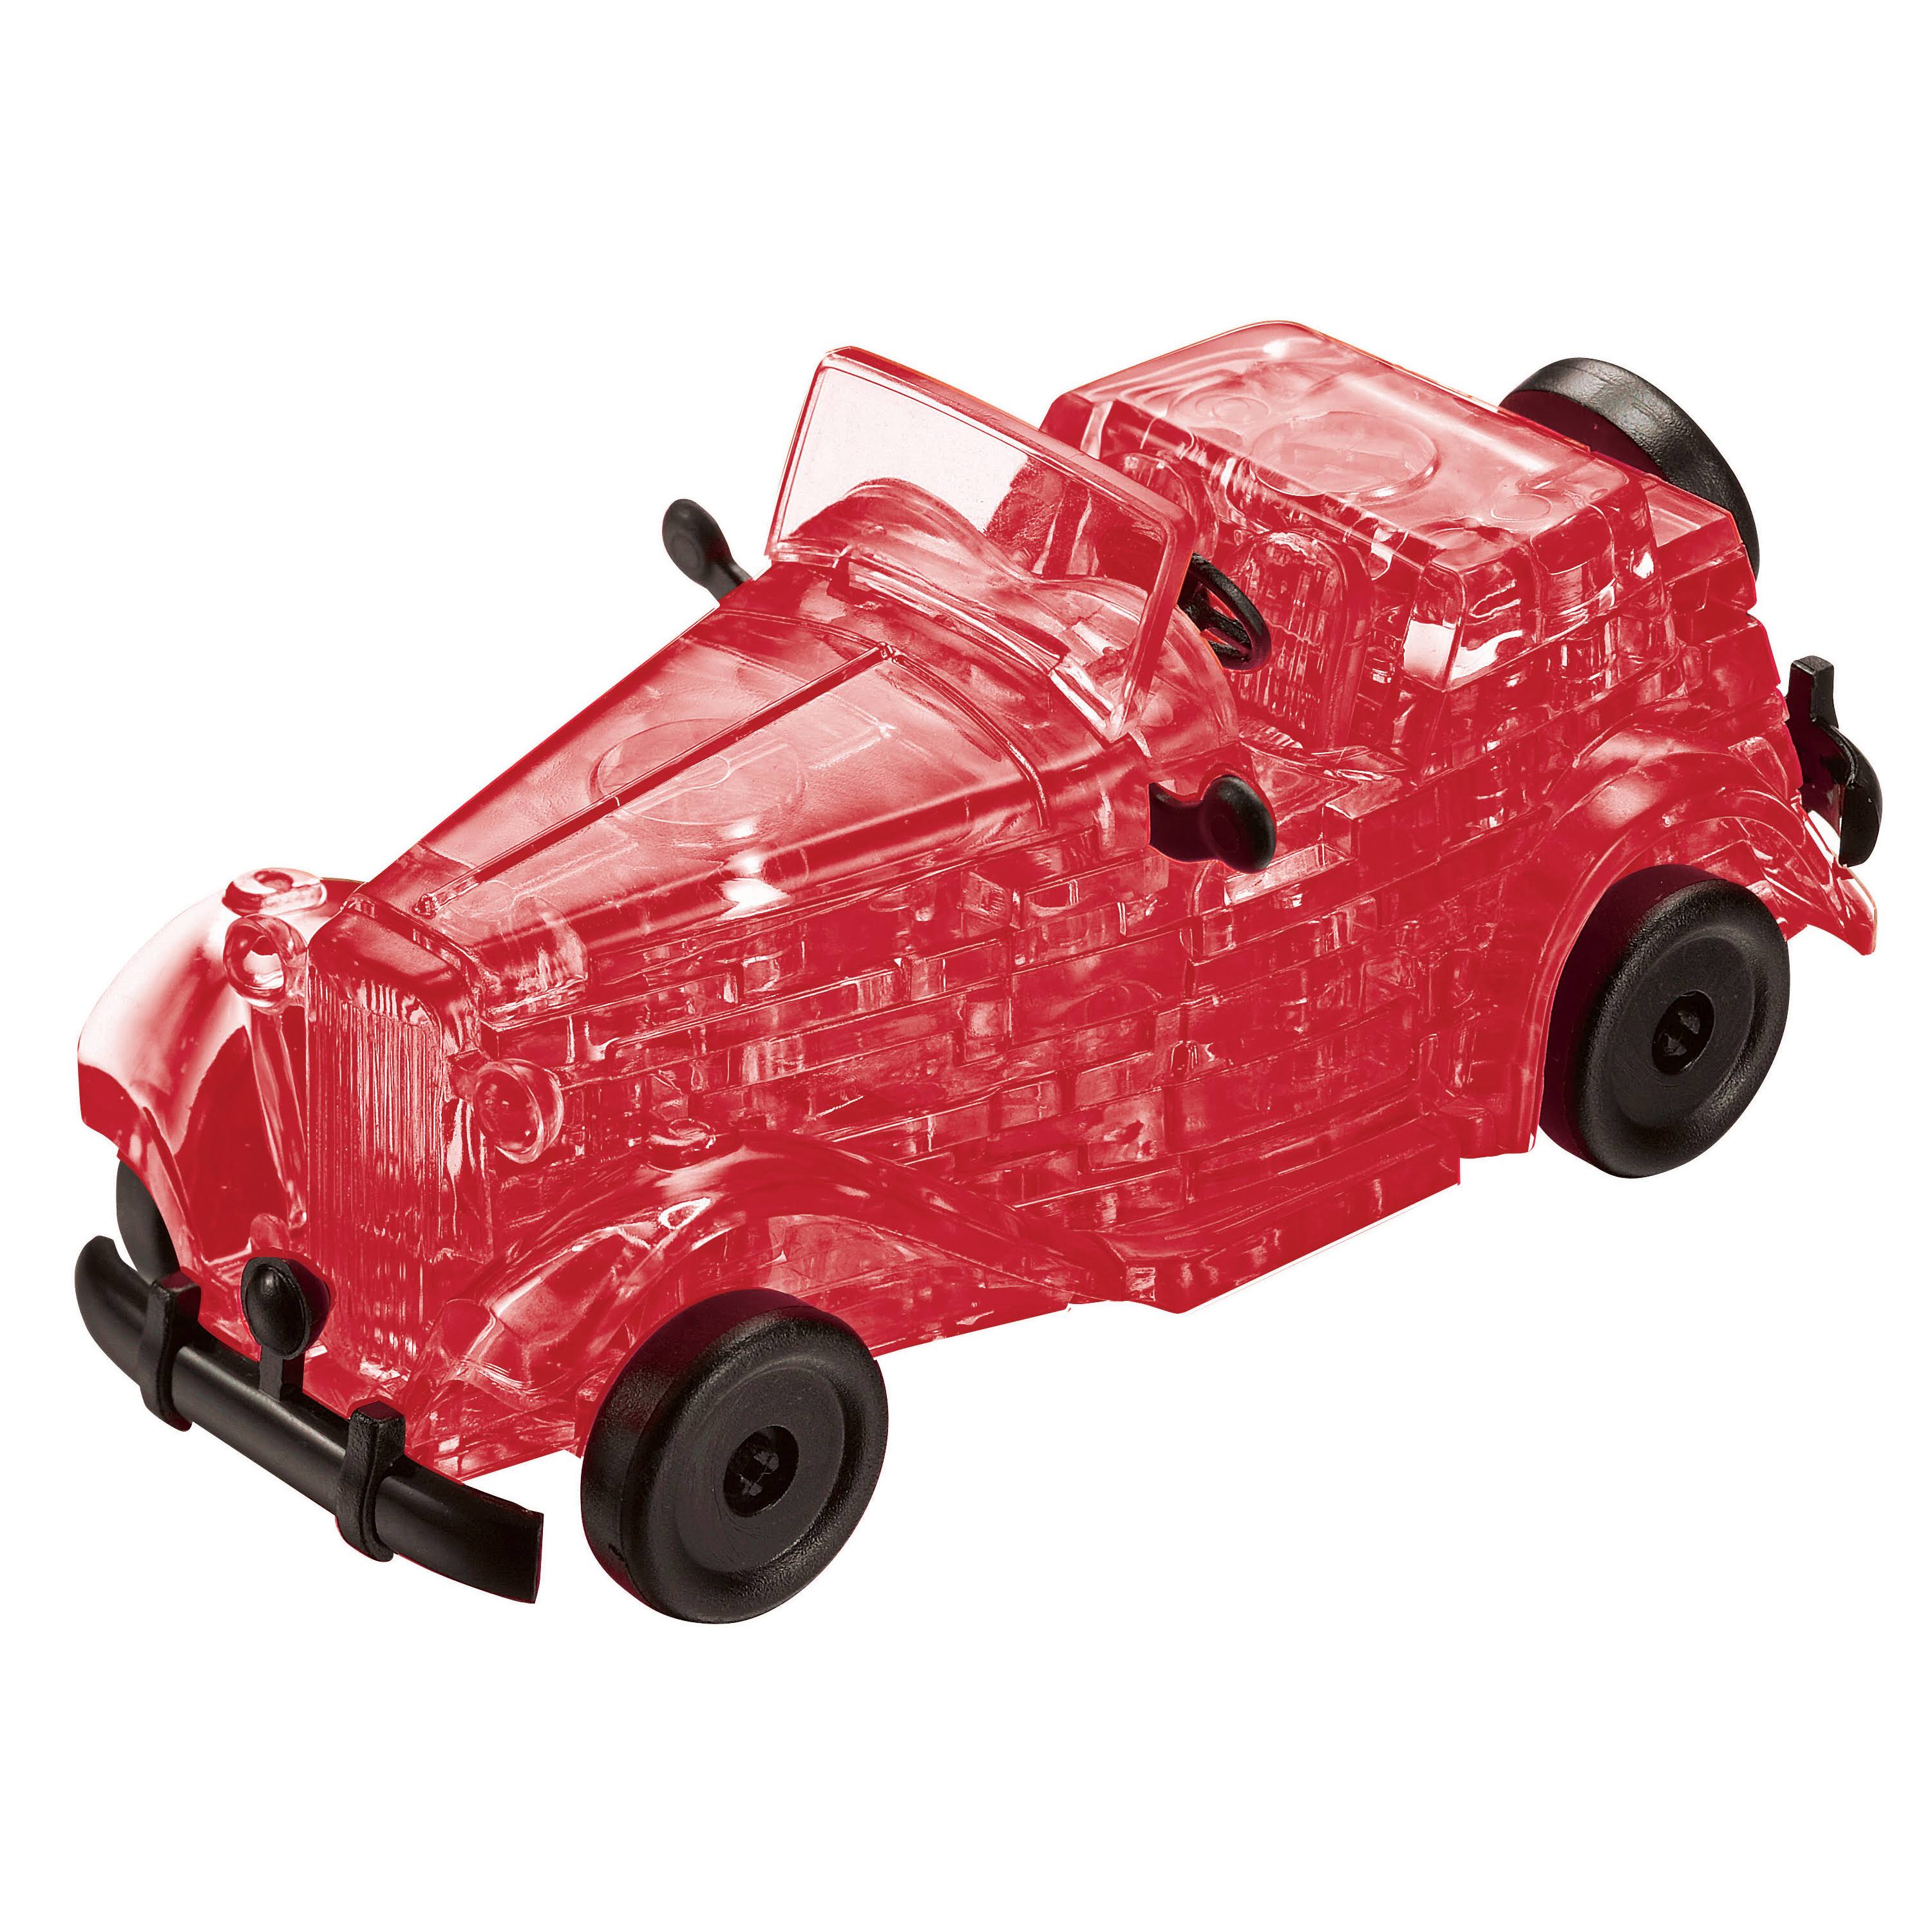 University Games 3D Crystal Classic Car Puzzle - Red, 53 Pieces